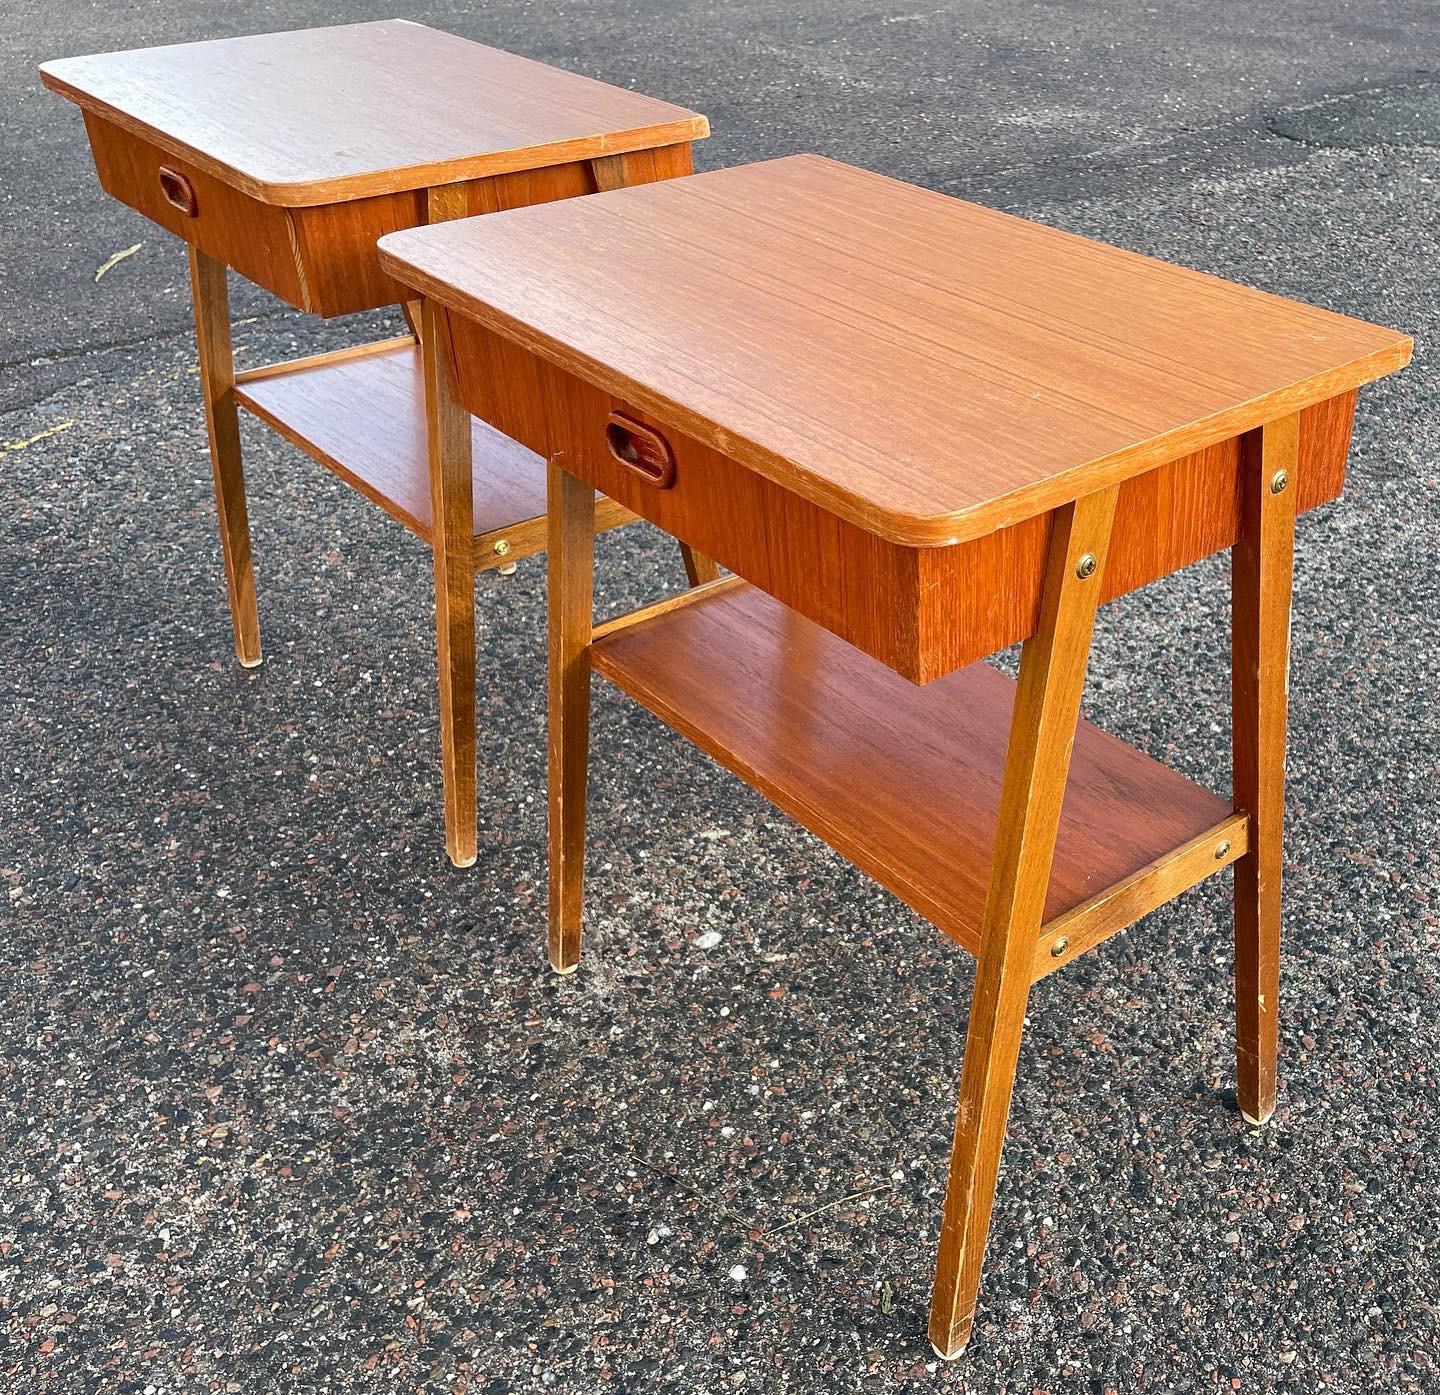 Mid-Century Modern Swedish Night Stands in Teak, 1960's For Sale 1